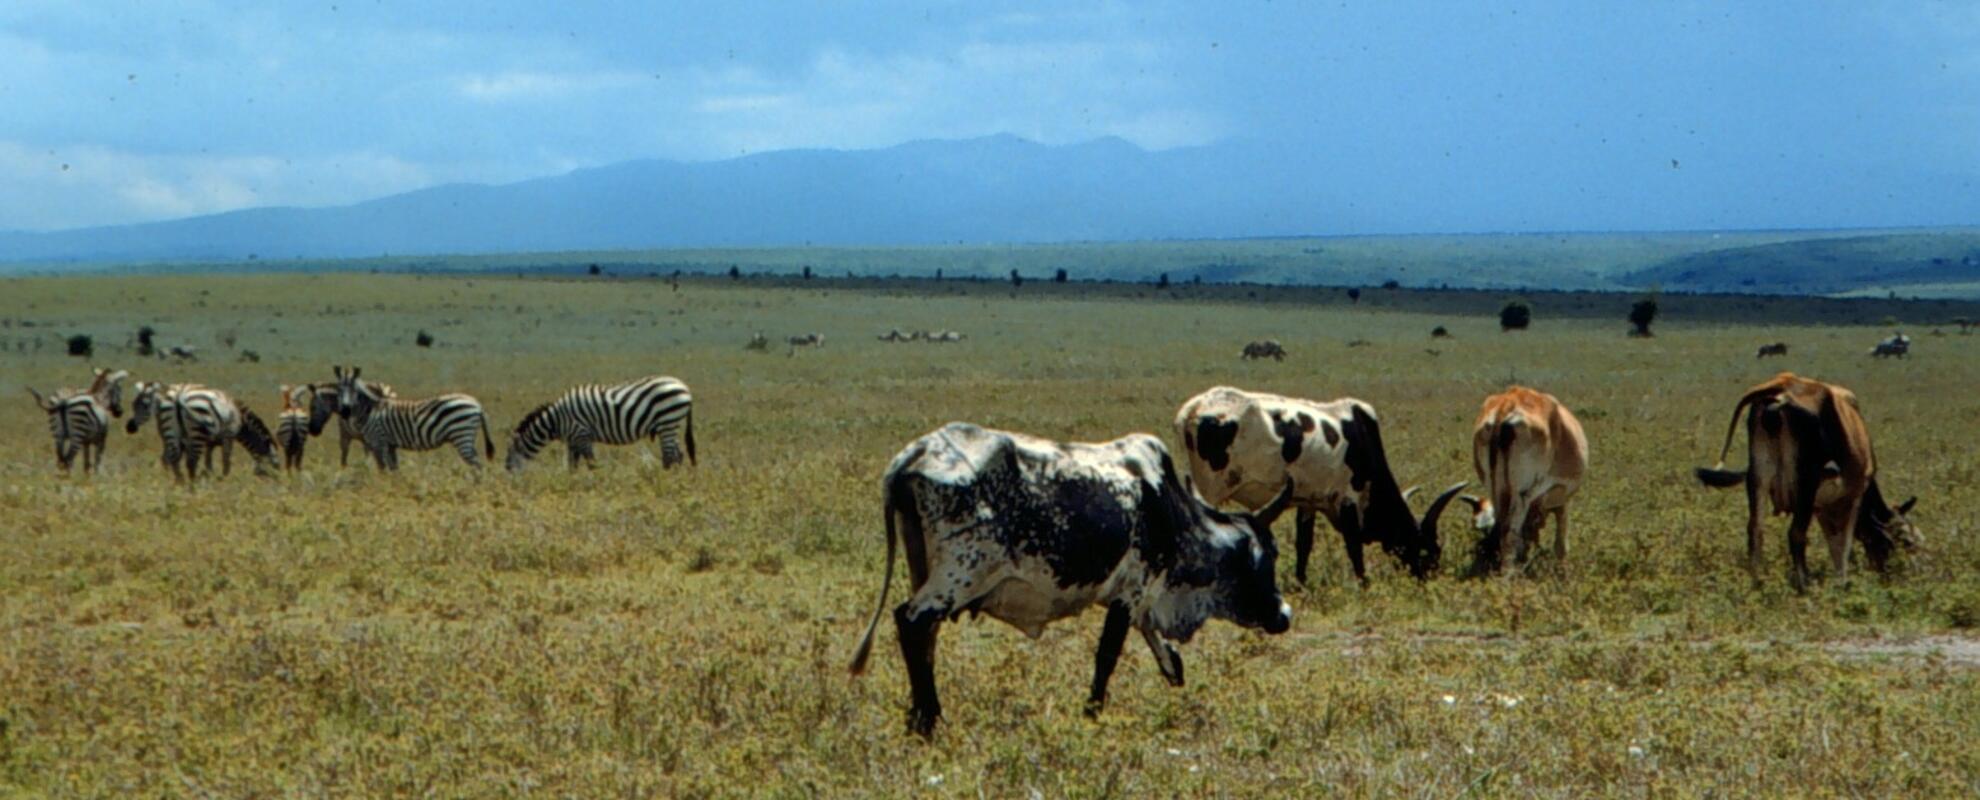 Understanding zoonotic risks from wild meat at the Kenya